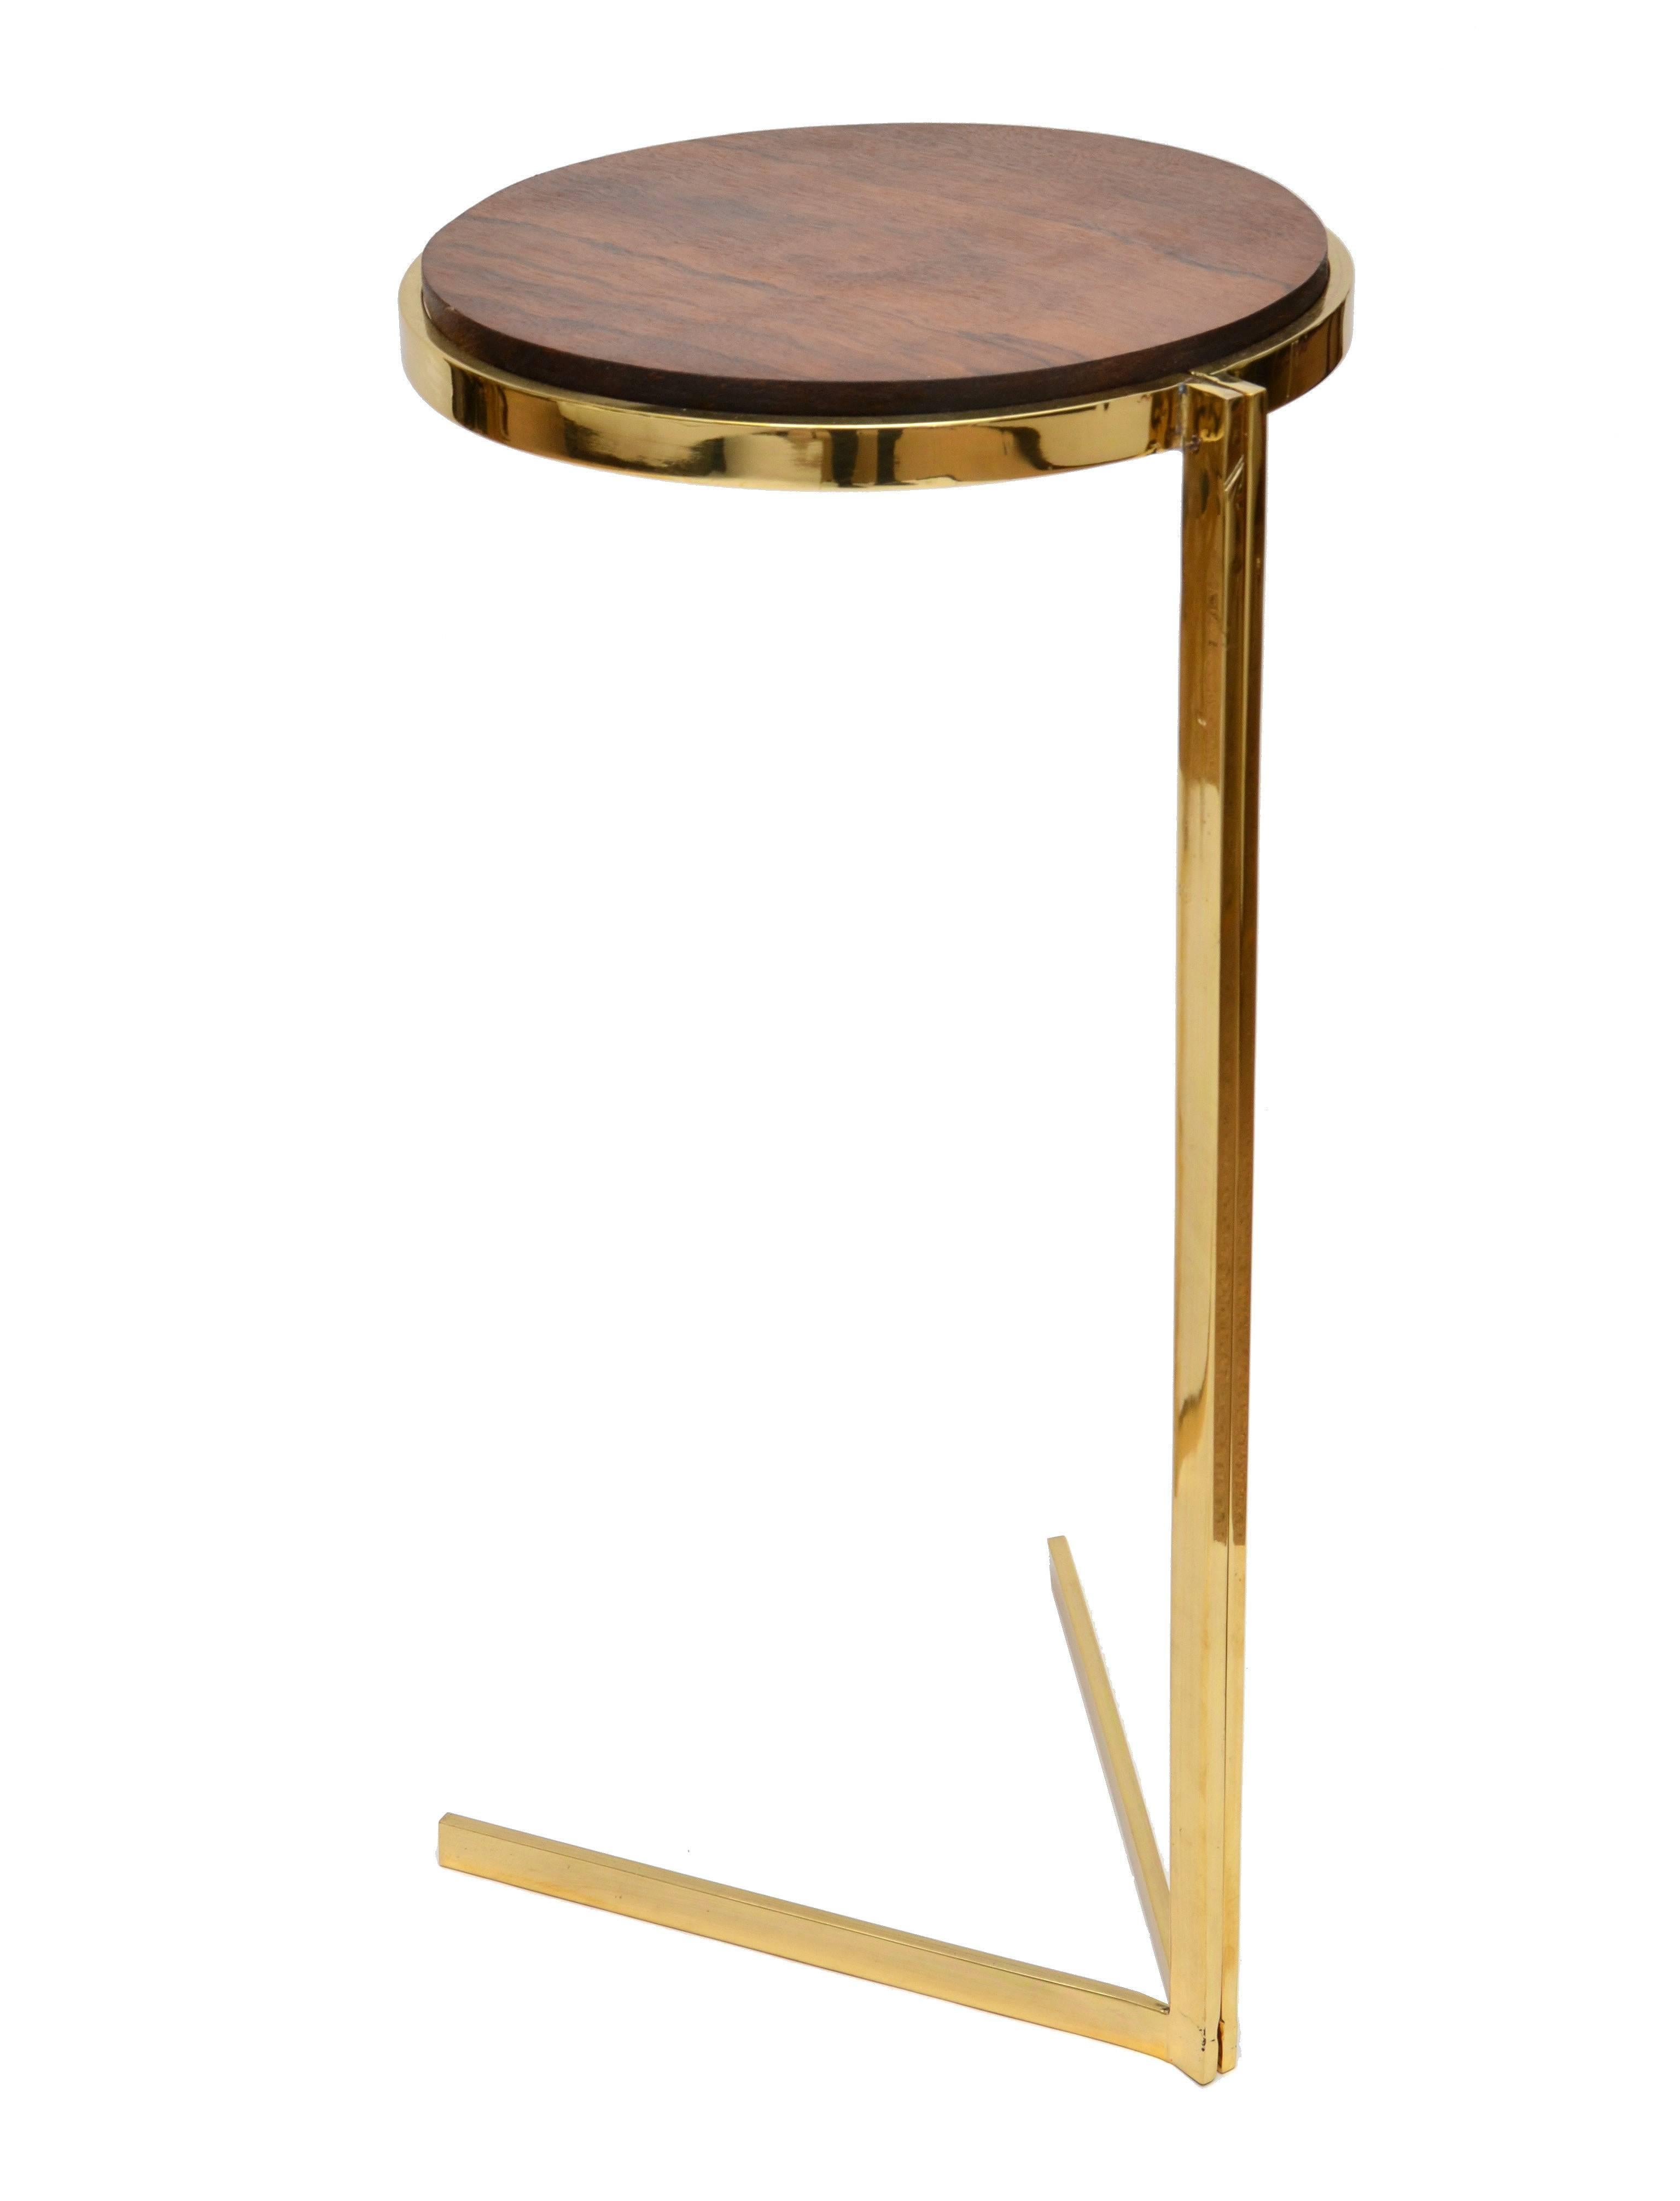 North American Art Deco Personal Brass with Wooden Top Side Tables